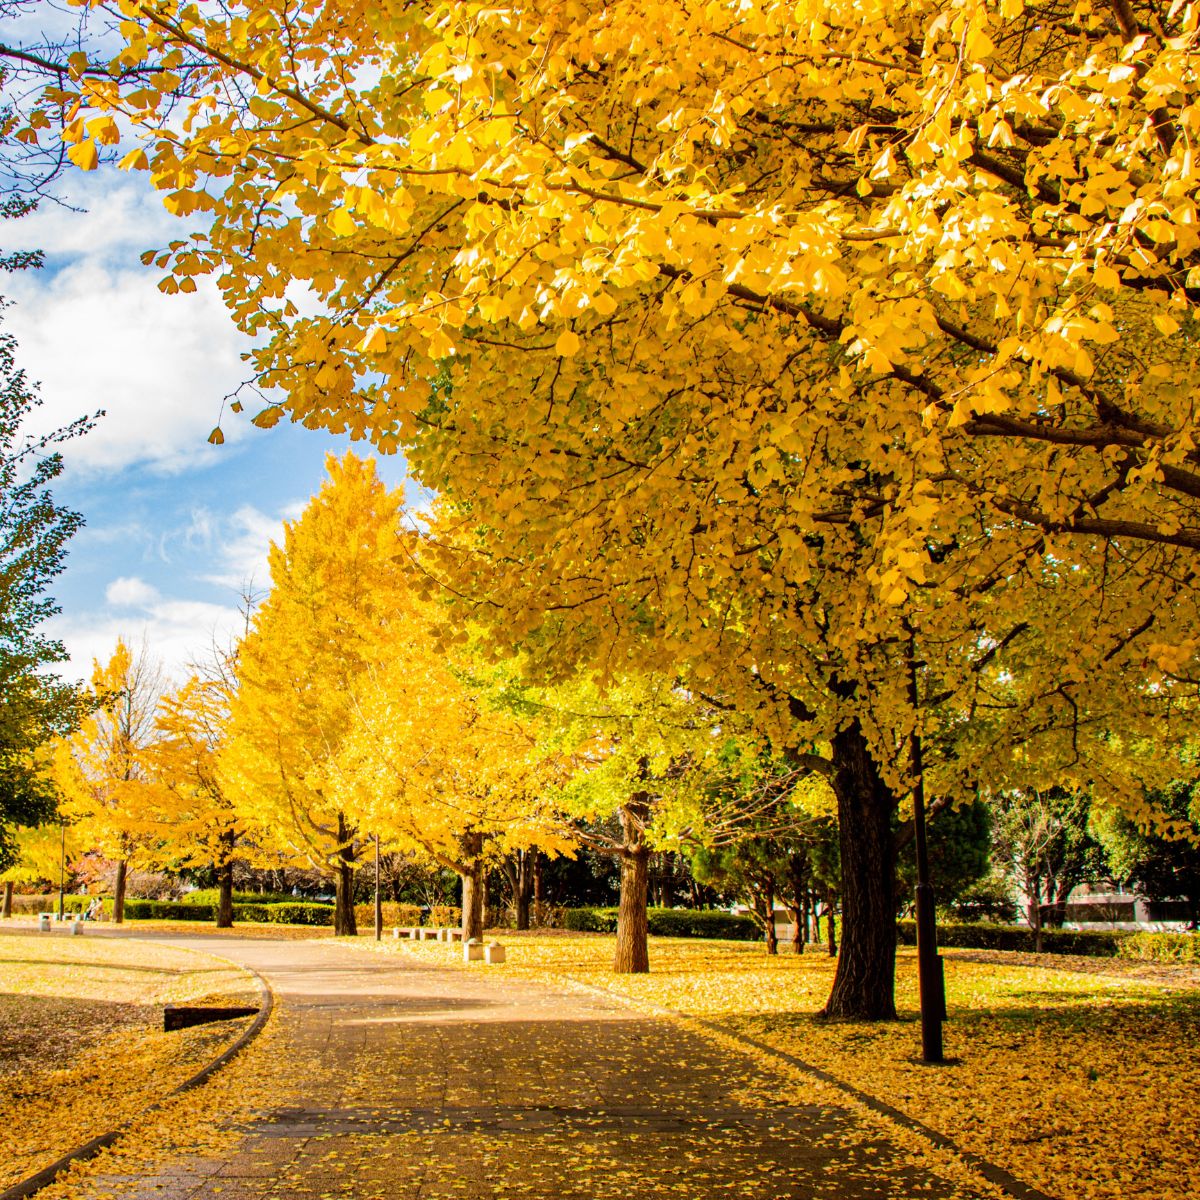 Ginkgo trees featured